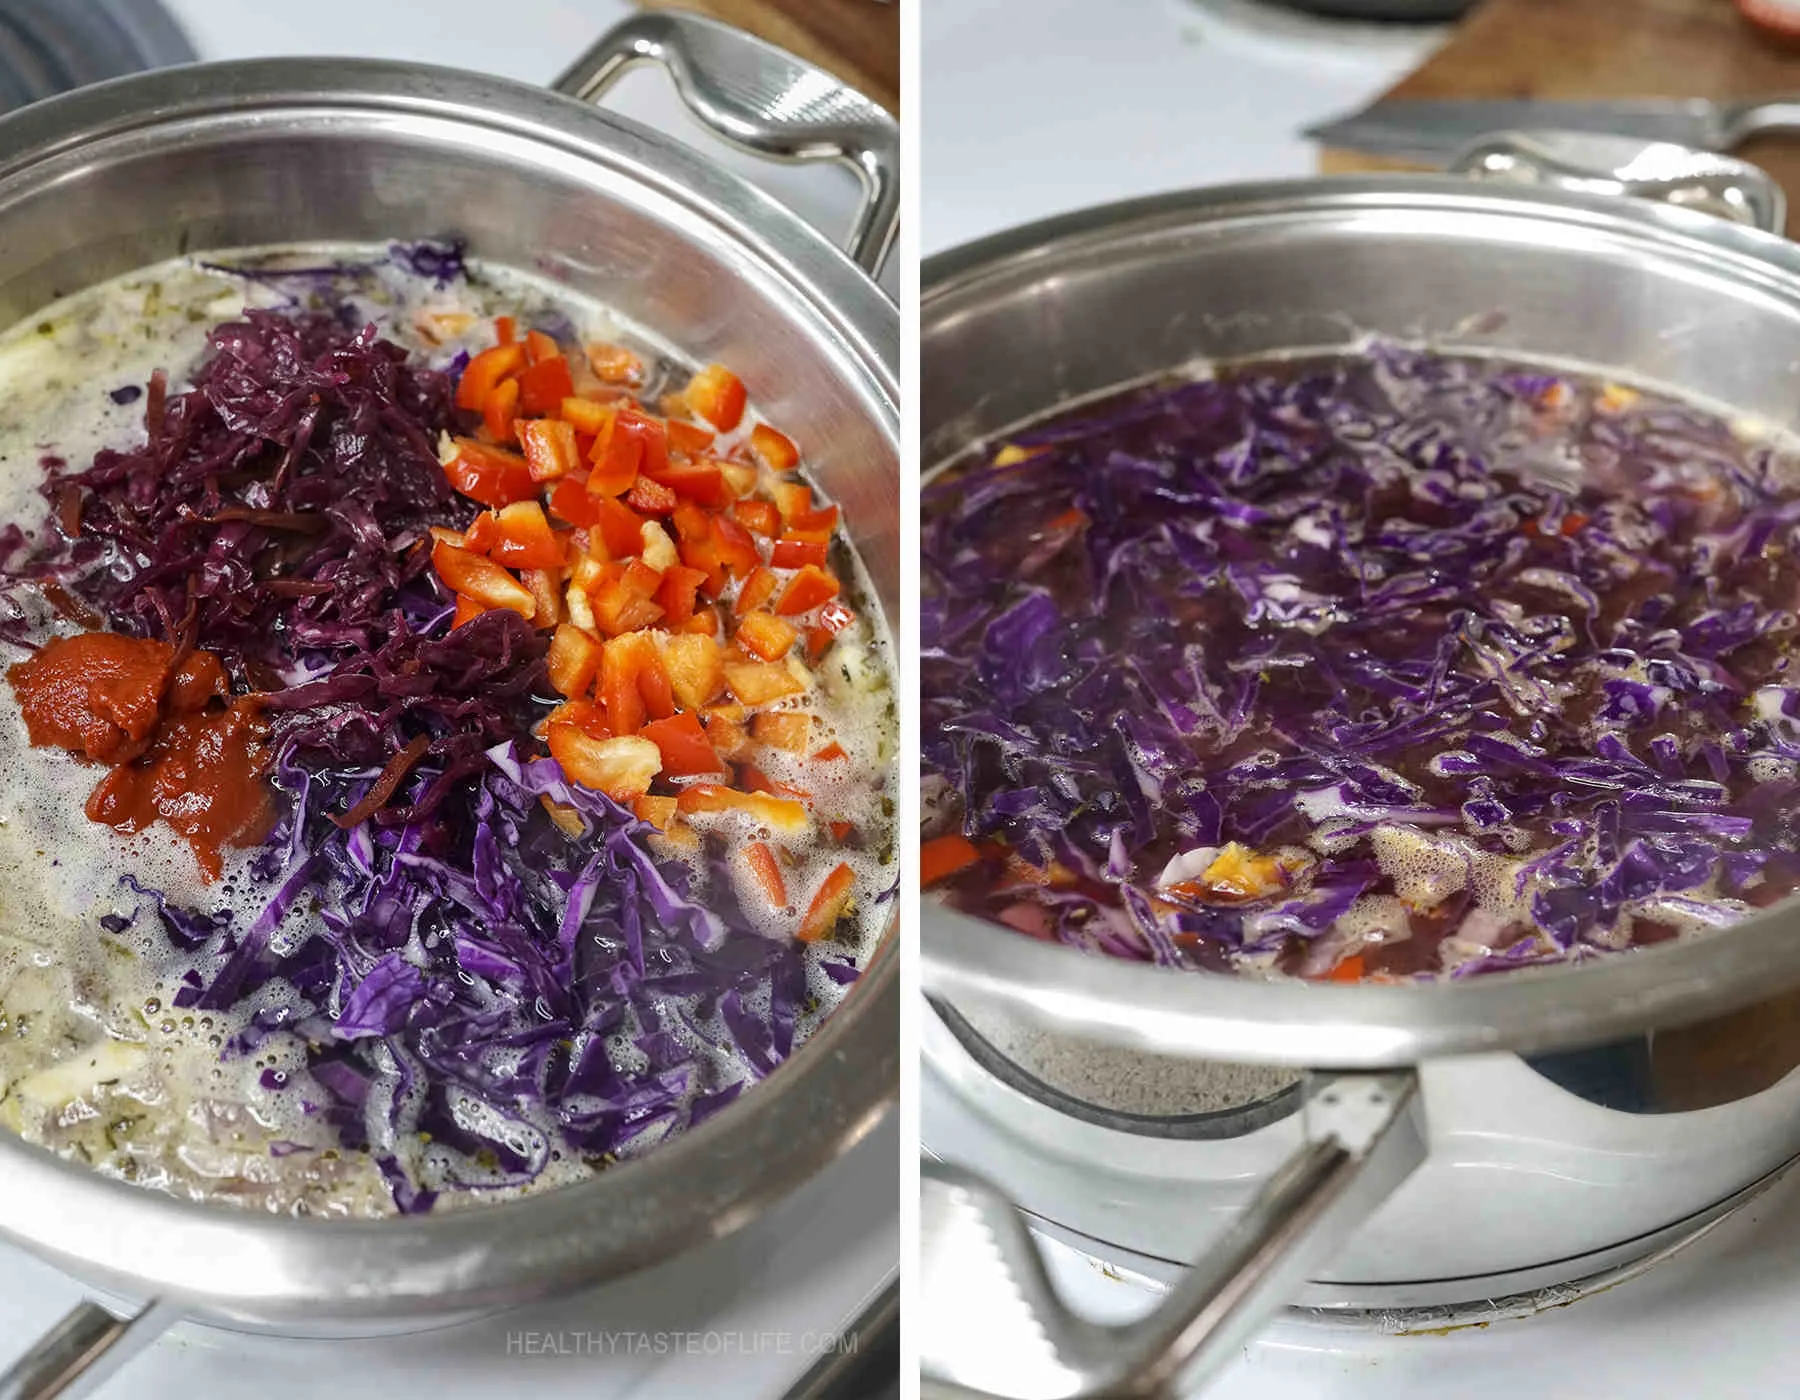 Process shots showing how to add the red cabbage, bell pepper red sauerkraut and tomato paste and cook it.